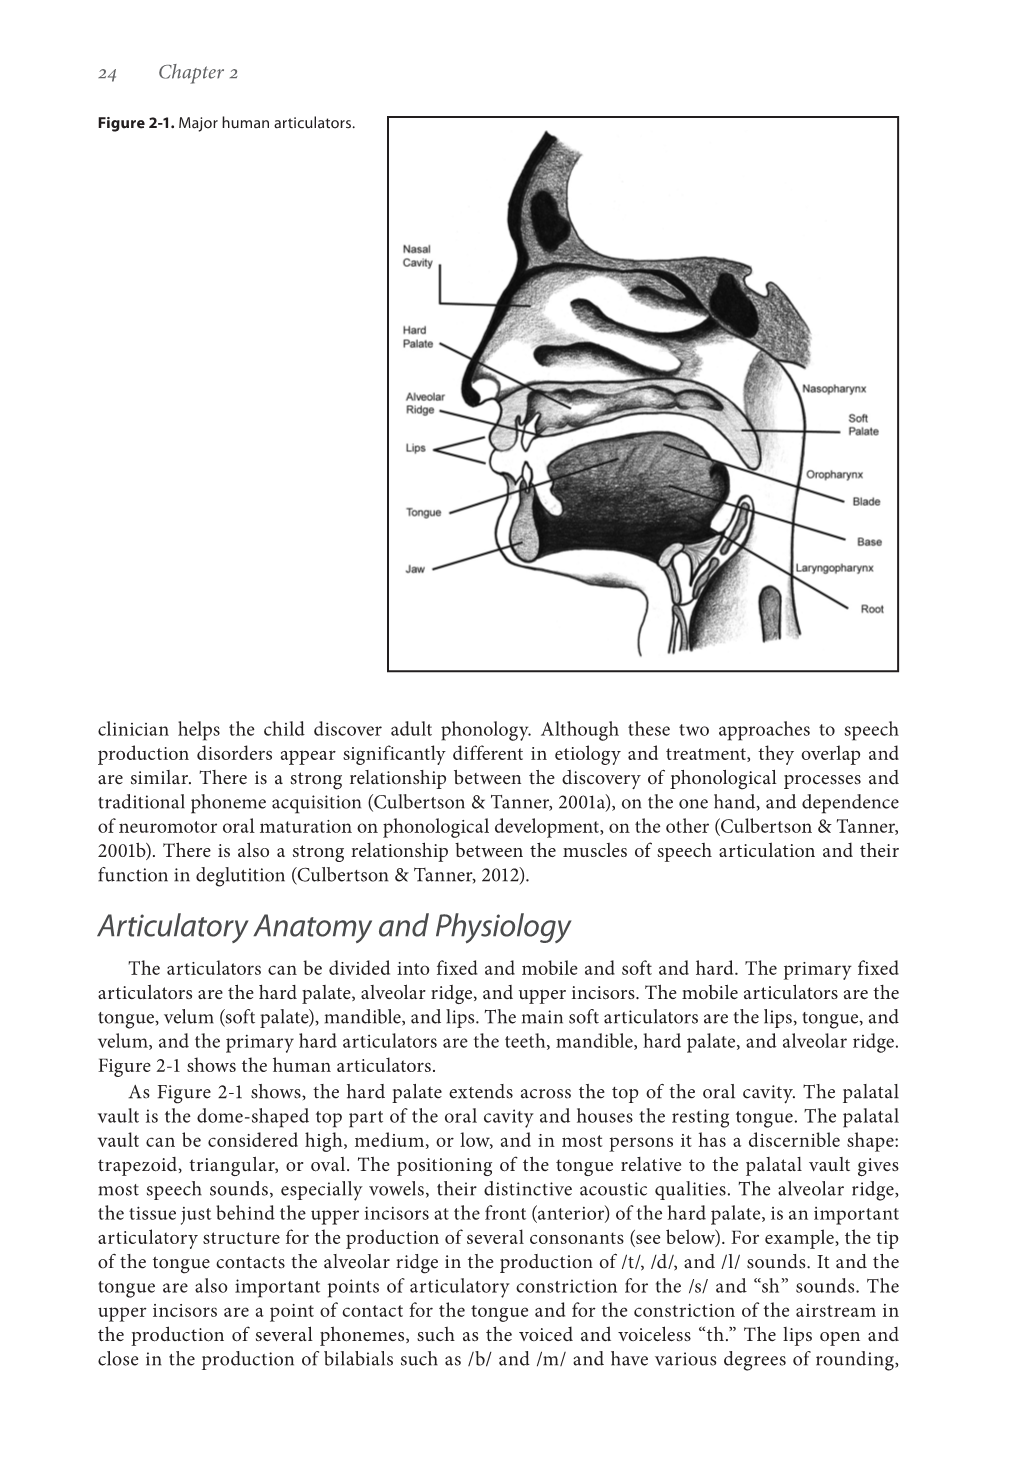 Articulatory Anatomy and Physiology the Articulators Can Be Divided Into Fixed and Mobile and Soft and Hard